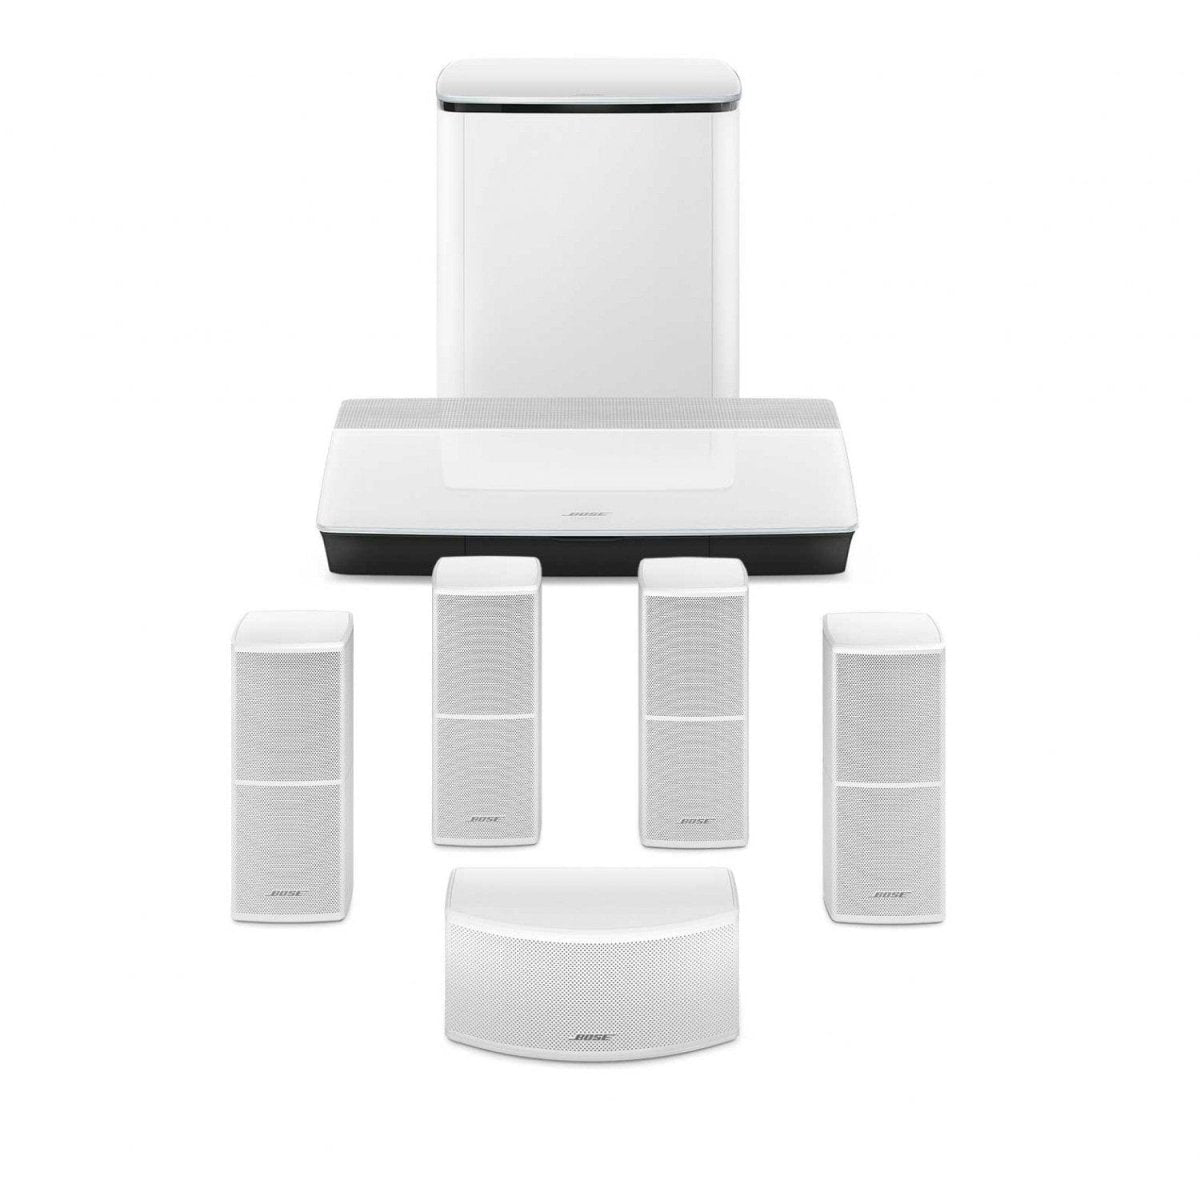 BOSE Lifestyle 600 5.1 Channel Home Theatre Speaker System - White (Manufacturer Refurbished) - Atlantic Electrics